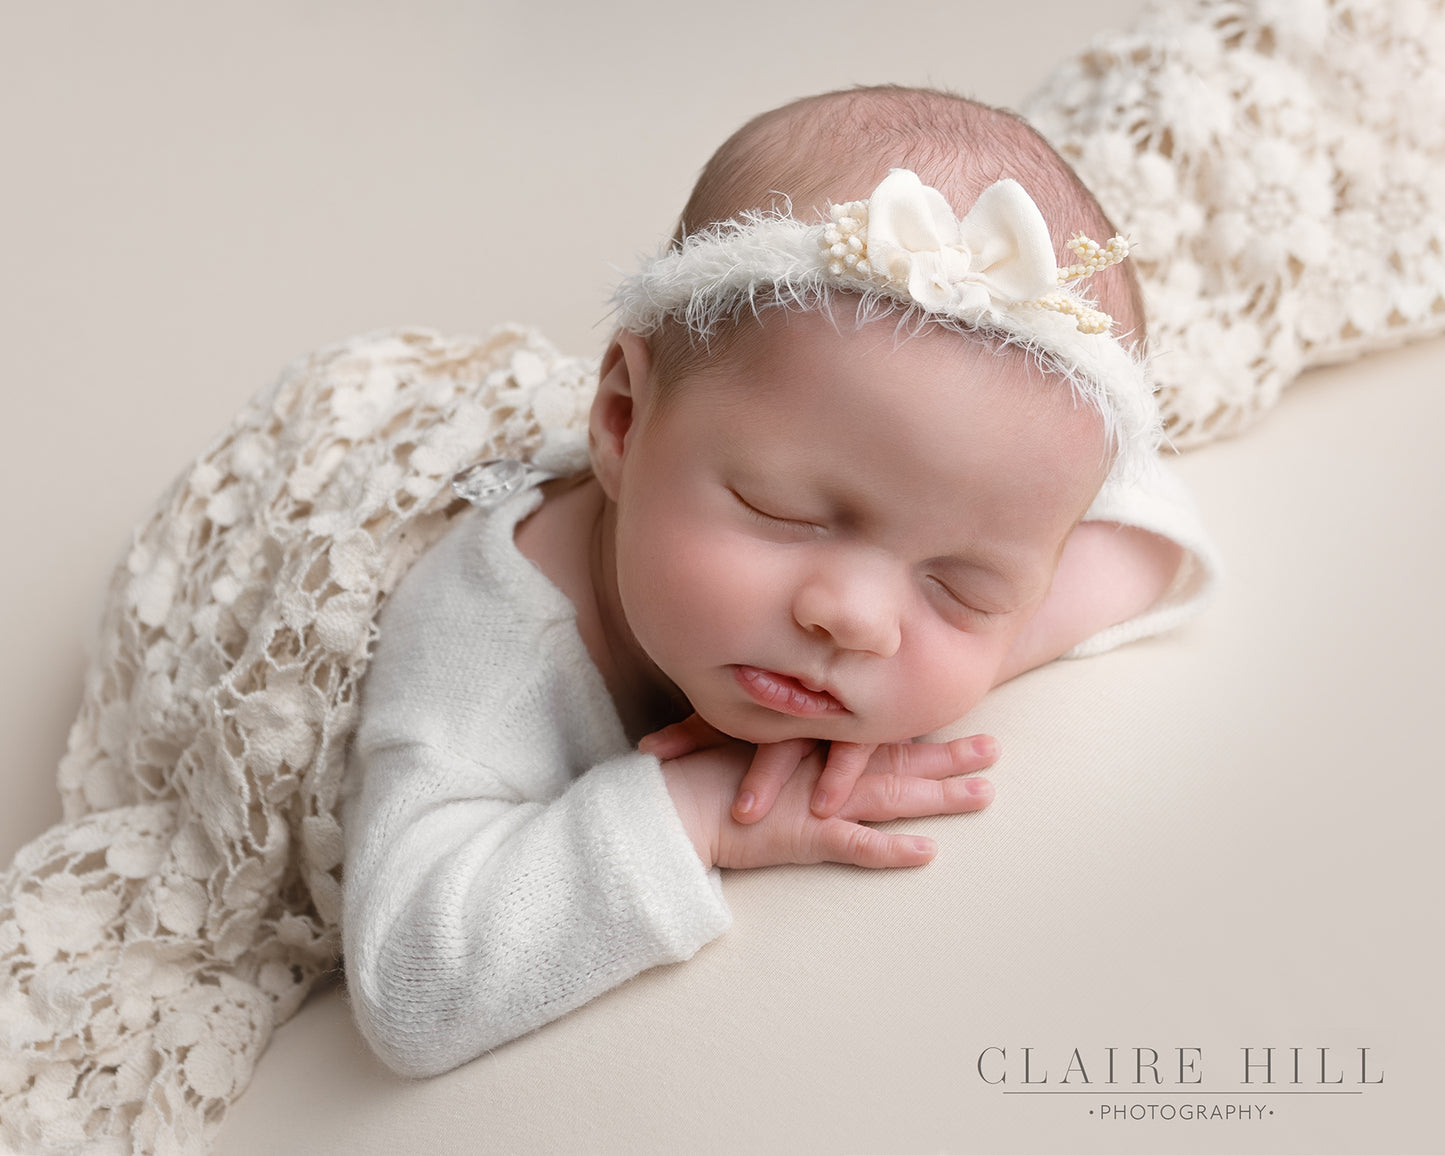 award winning Newborn Baby photography photos by Award winning Claire Hill Photography. Studio based in  Perton Wolverhampton West Midlands and Shropshire book today